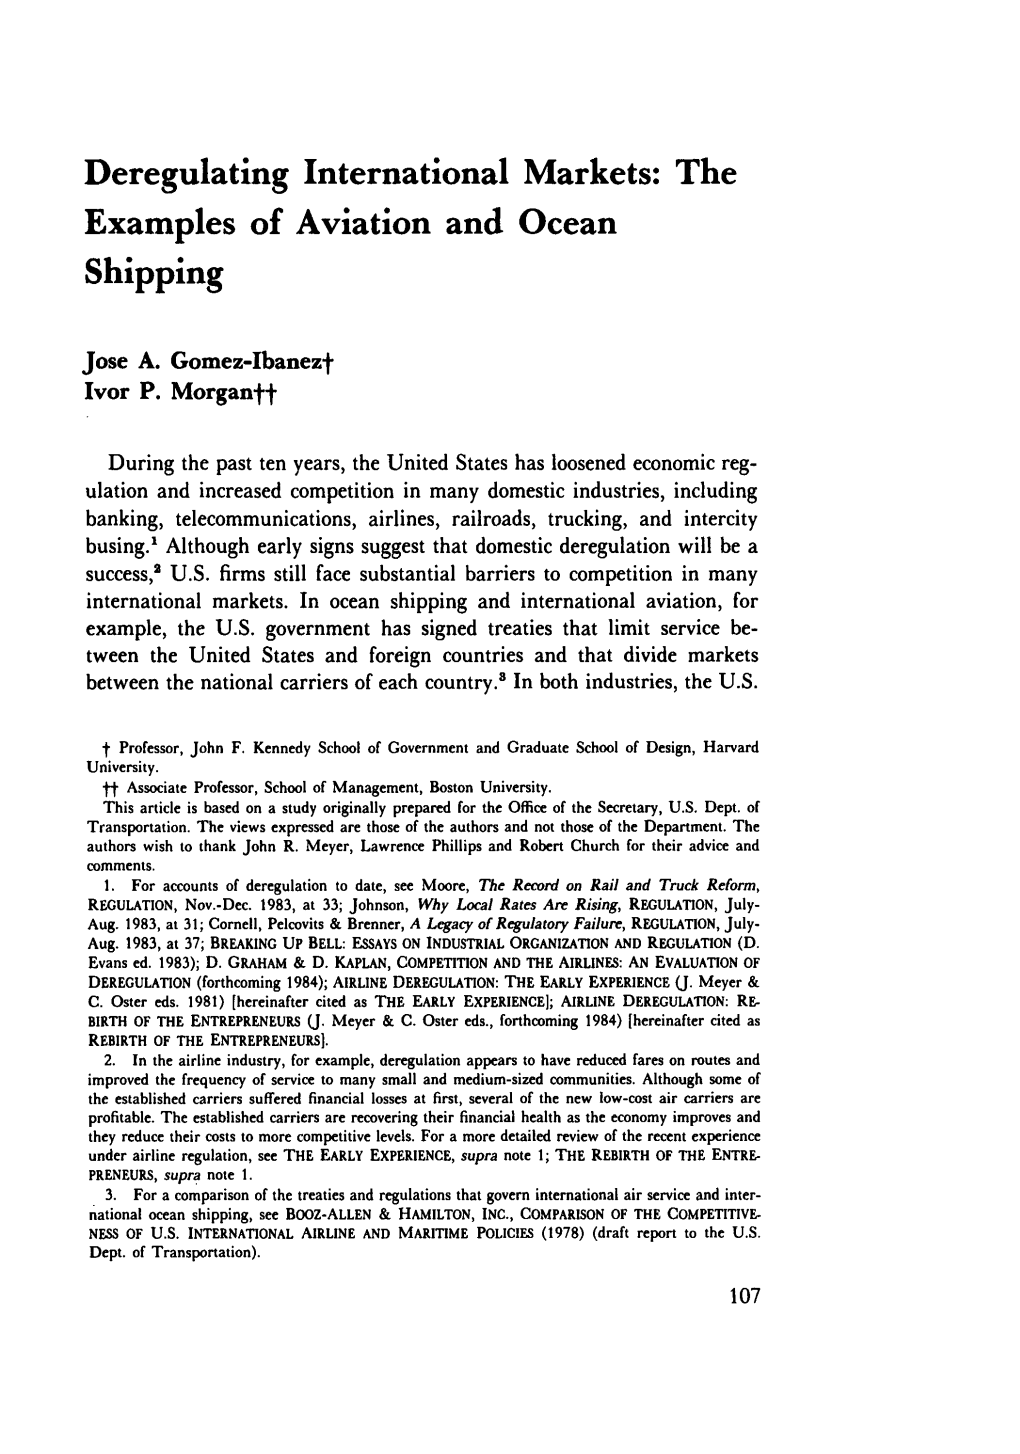 Deregulating International Markets: the Examples of Aviation and Ocean Shipping